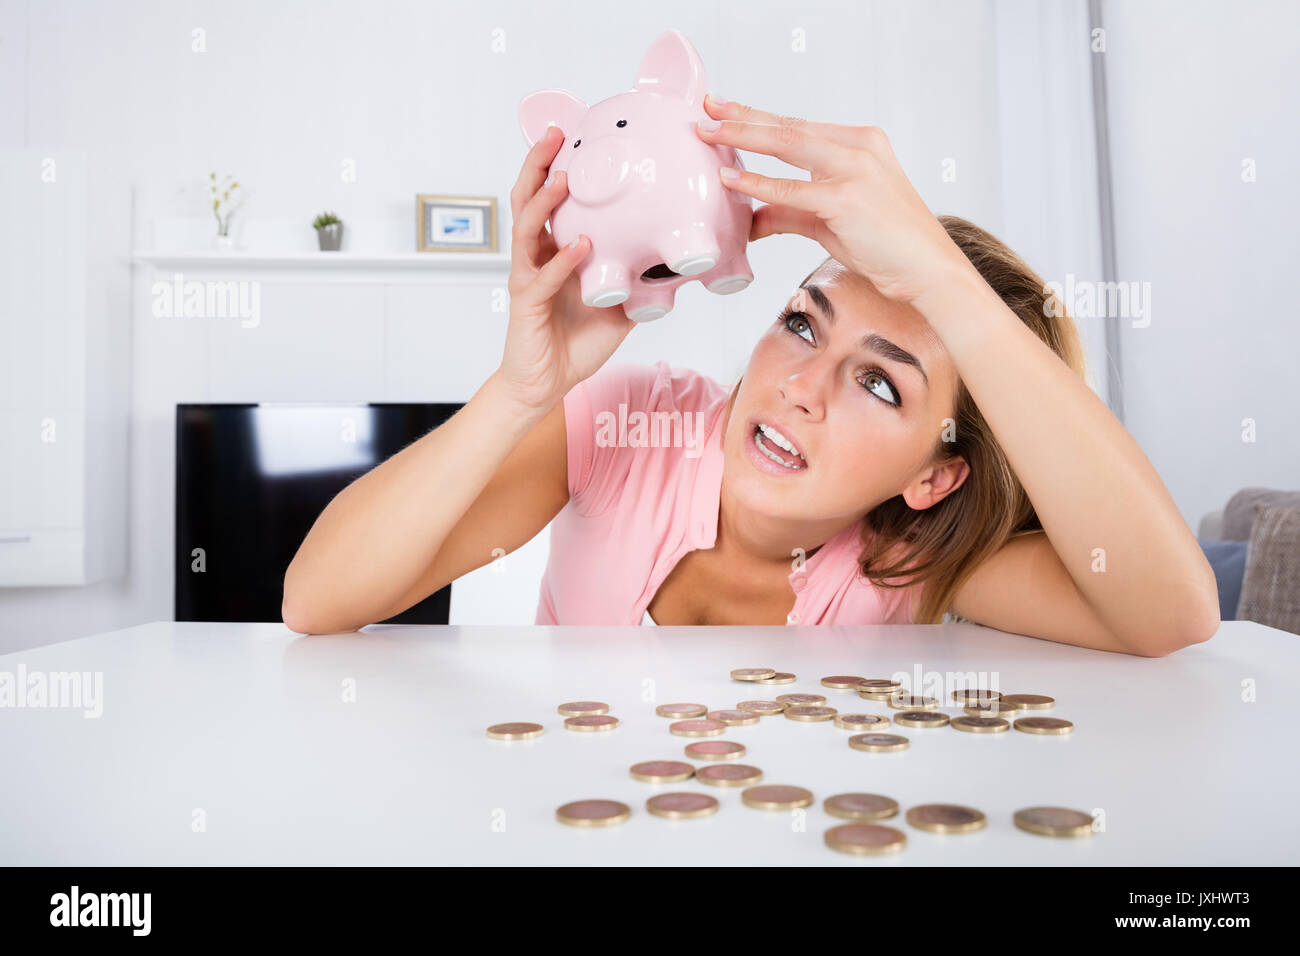 Young Unhappy Woman Emptying Her Piggybank Savings With Less Than Expected At Home Stock Photo